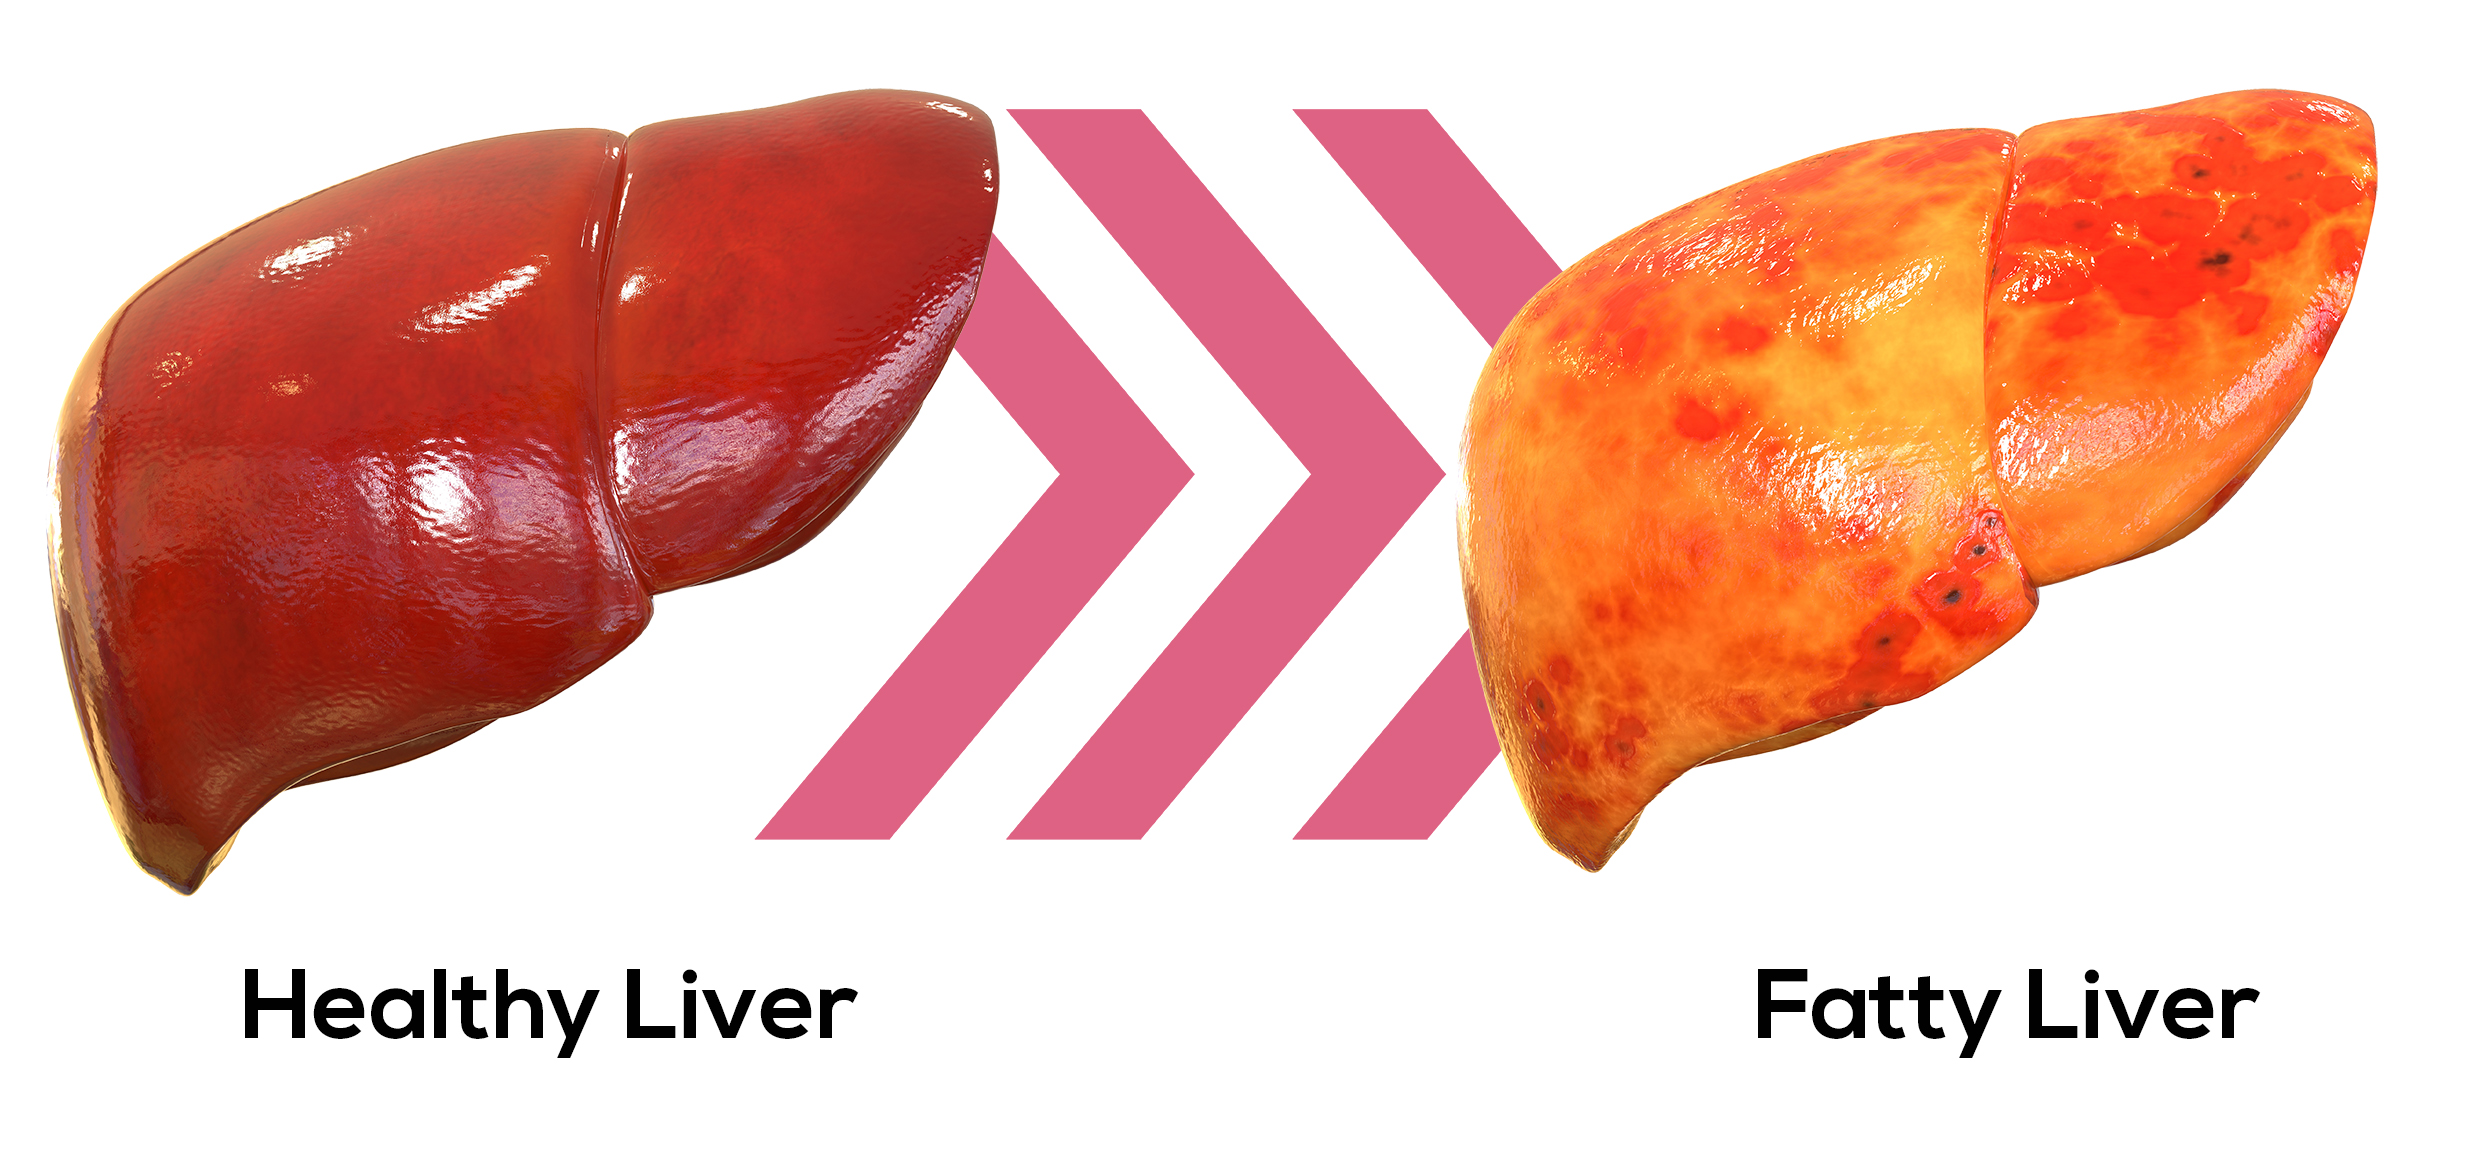 Unraveling non-alcoholic fatty liver disease - Faculty of Medicine -  University of Queensland